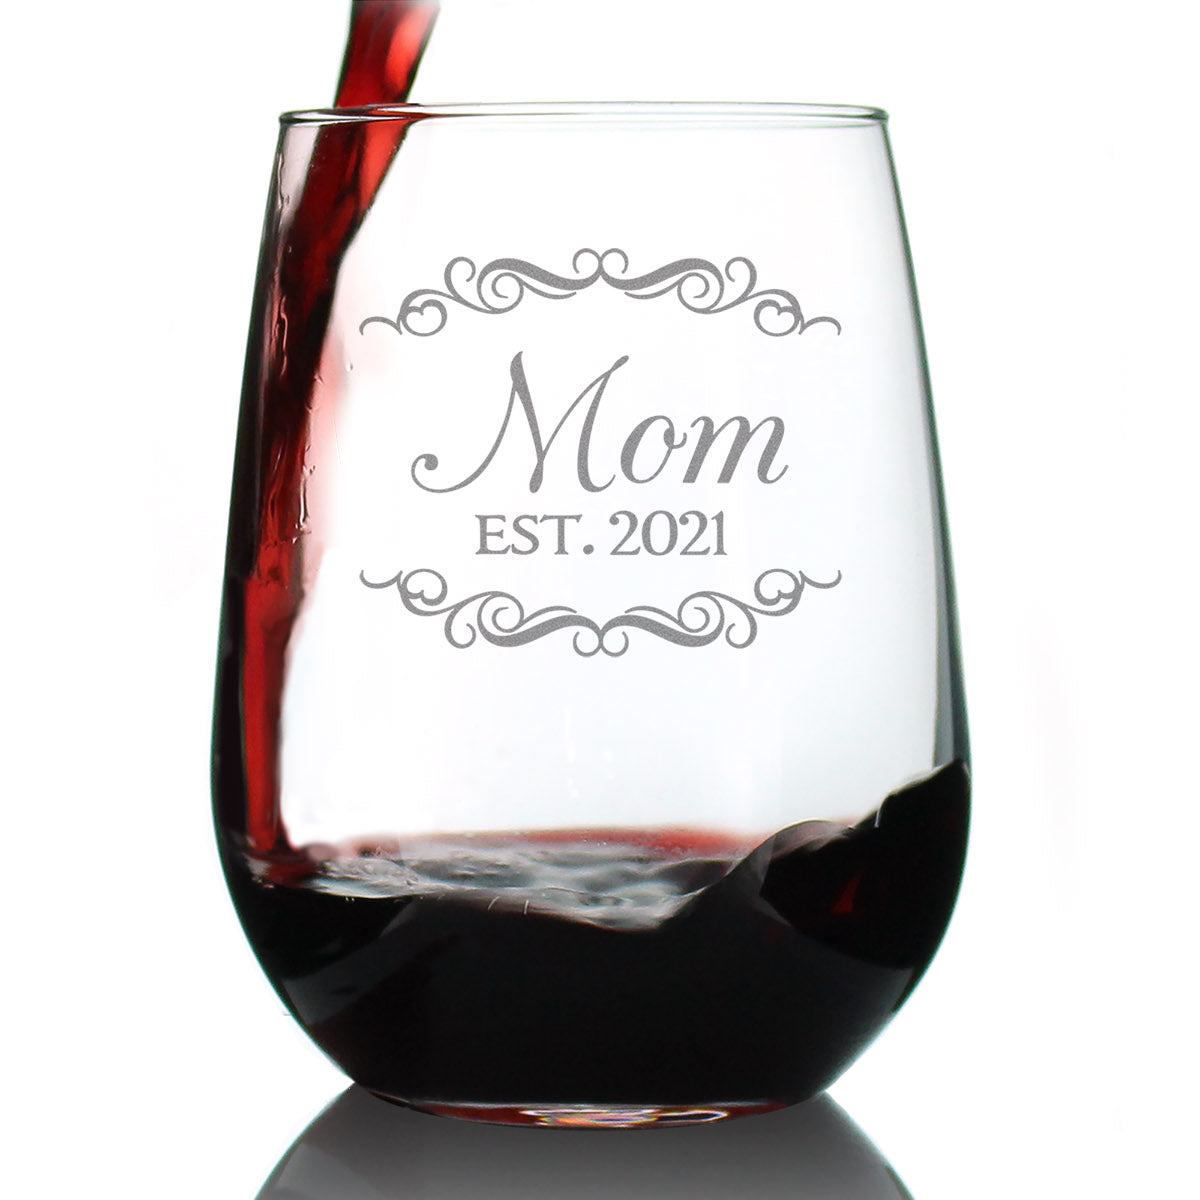 Mom Est 2020 - New Mother Stemless Wine Glass Gift for First Time Parents - Decorative 17 Oz Large Glasses